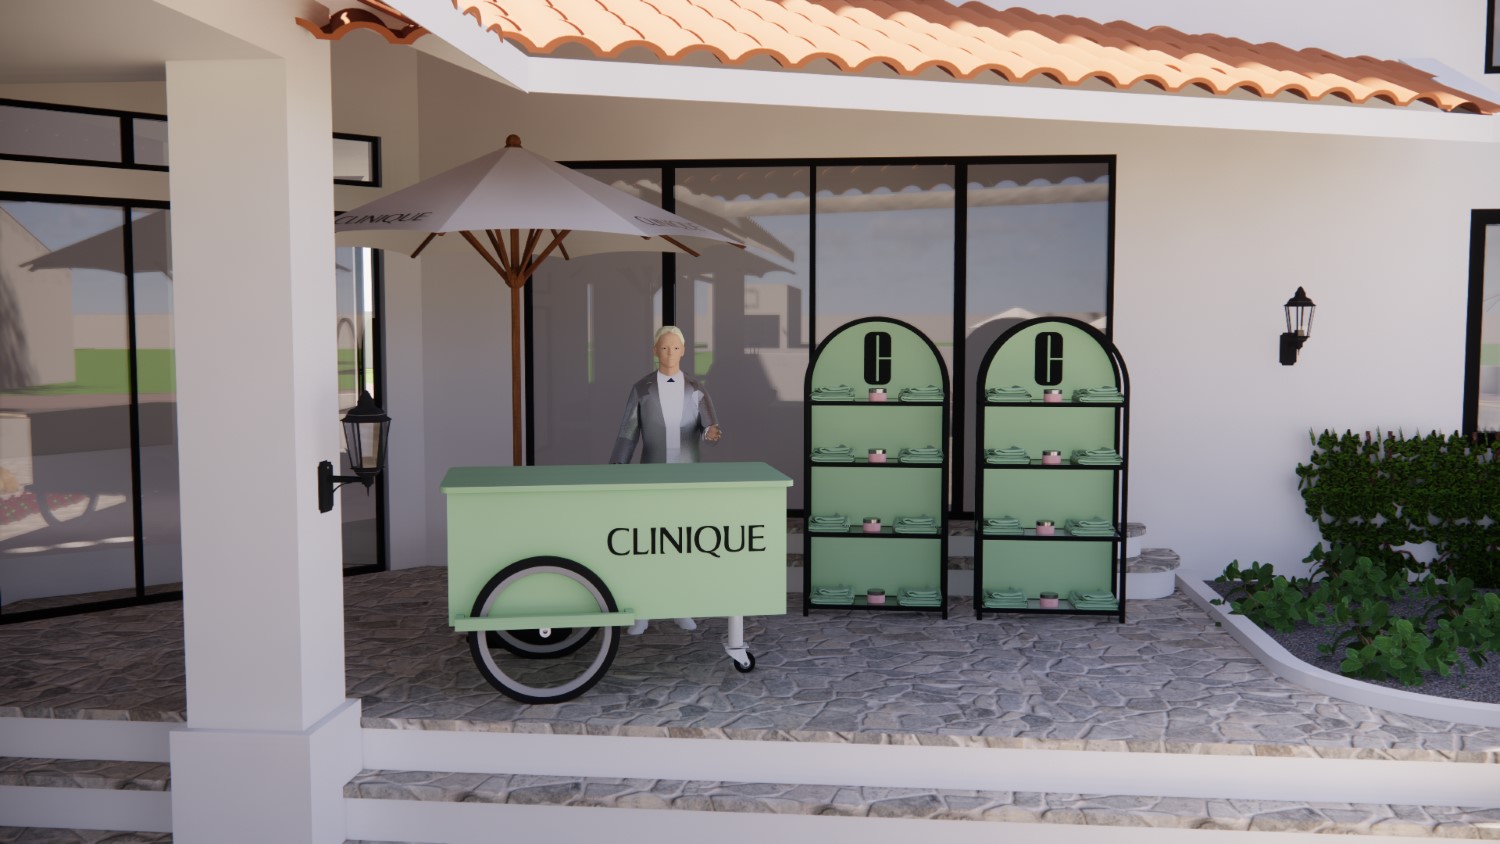 Clinique makes a splash at Coachella with Hydration House and "Protect Your Glow" campaign